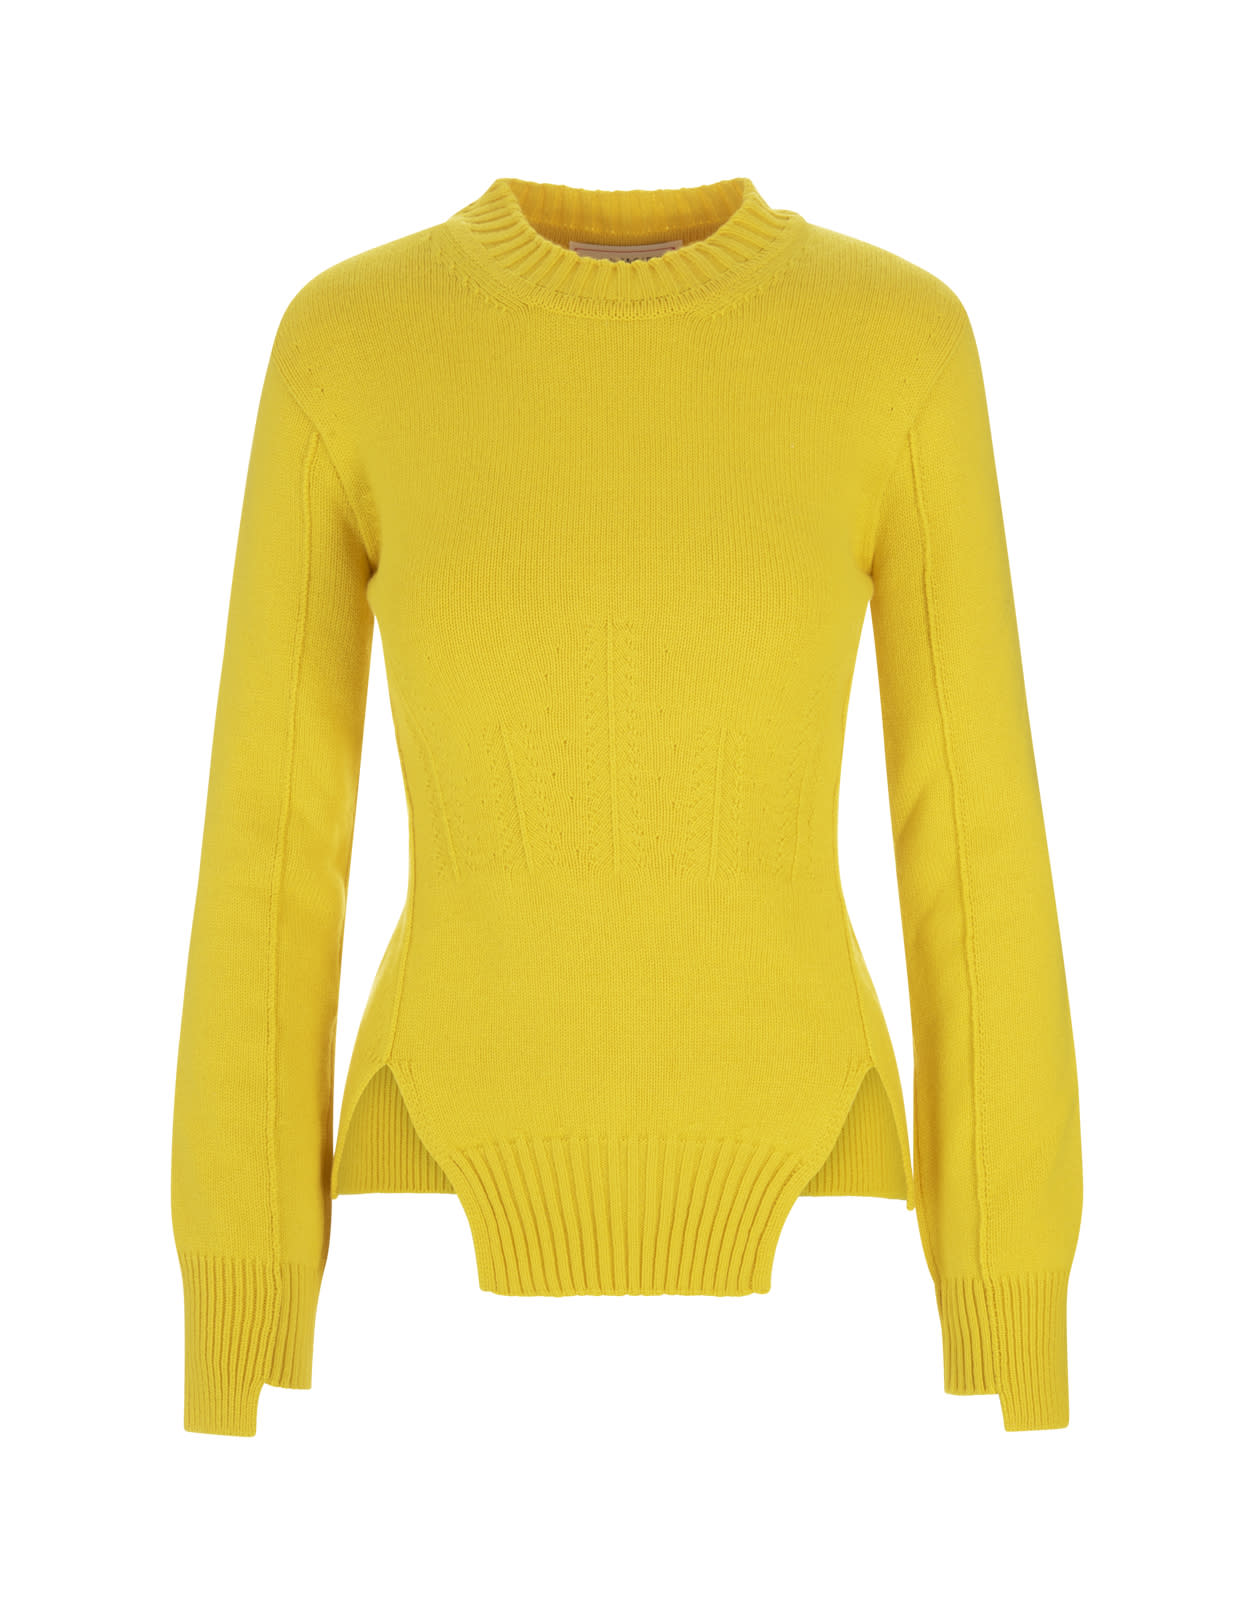 Alexander McQueen Woman Yellow Cashmere Sweater With Corset Stitching